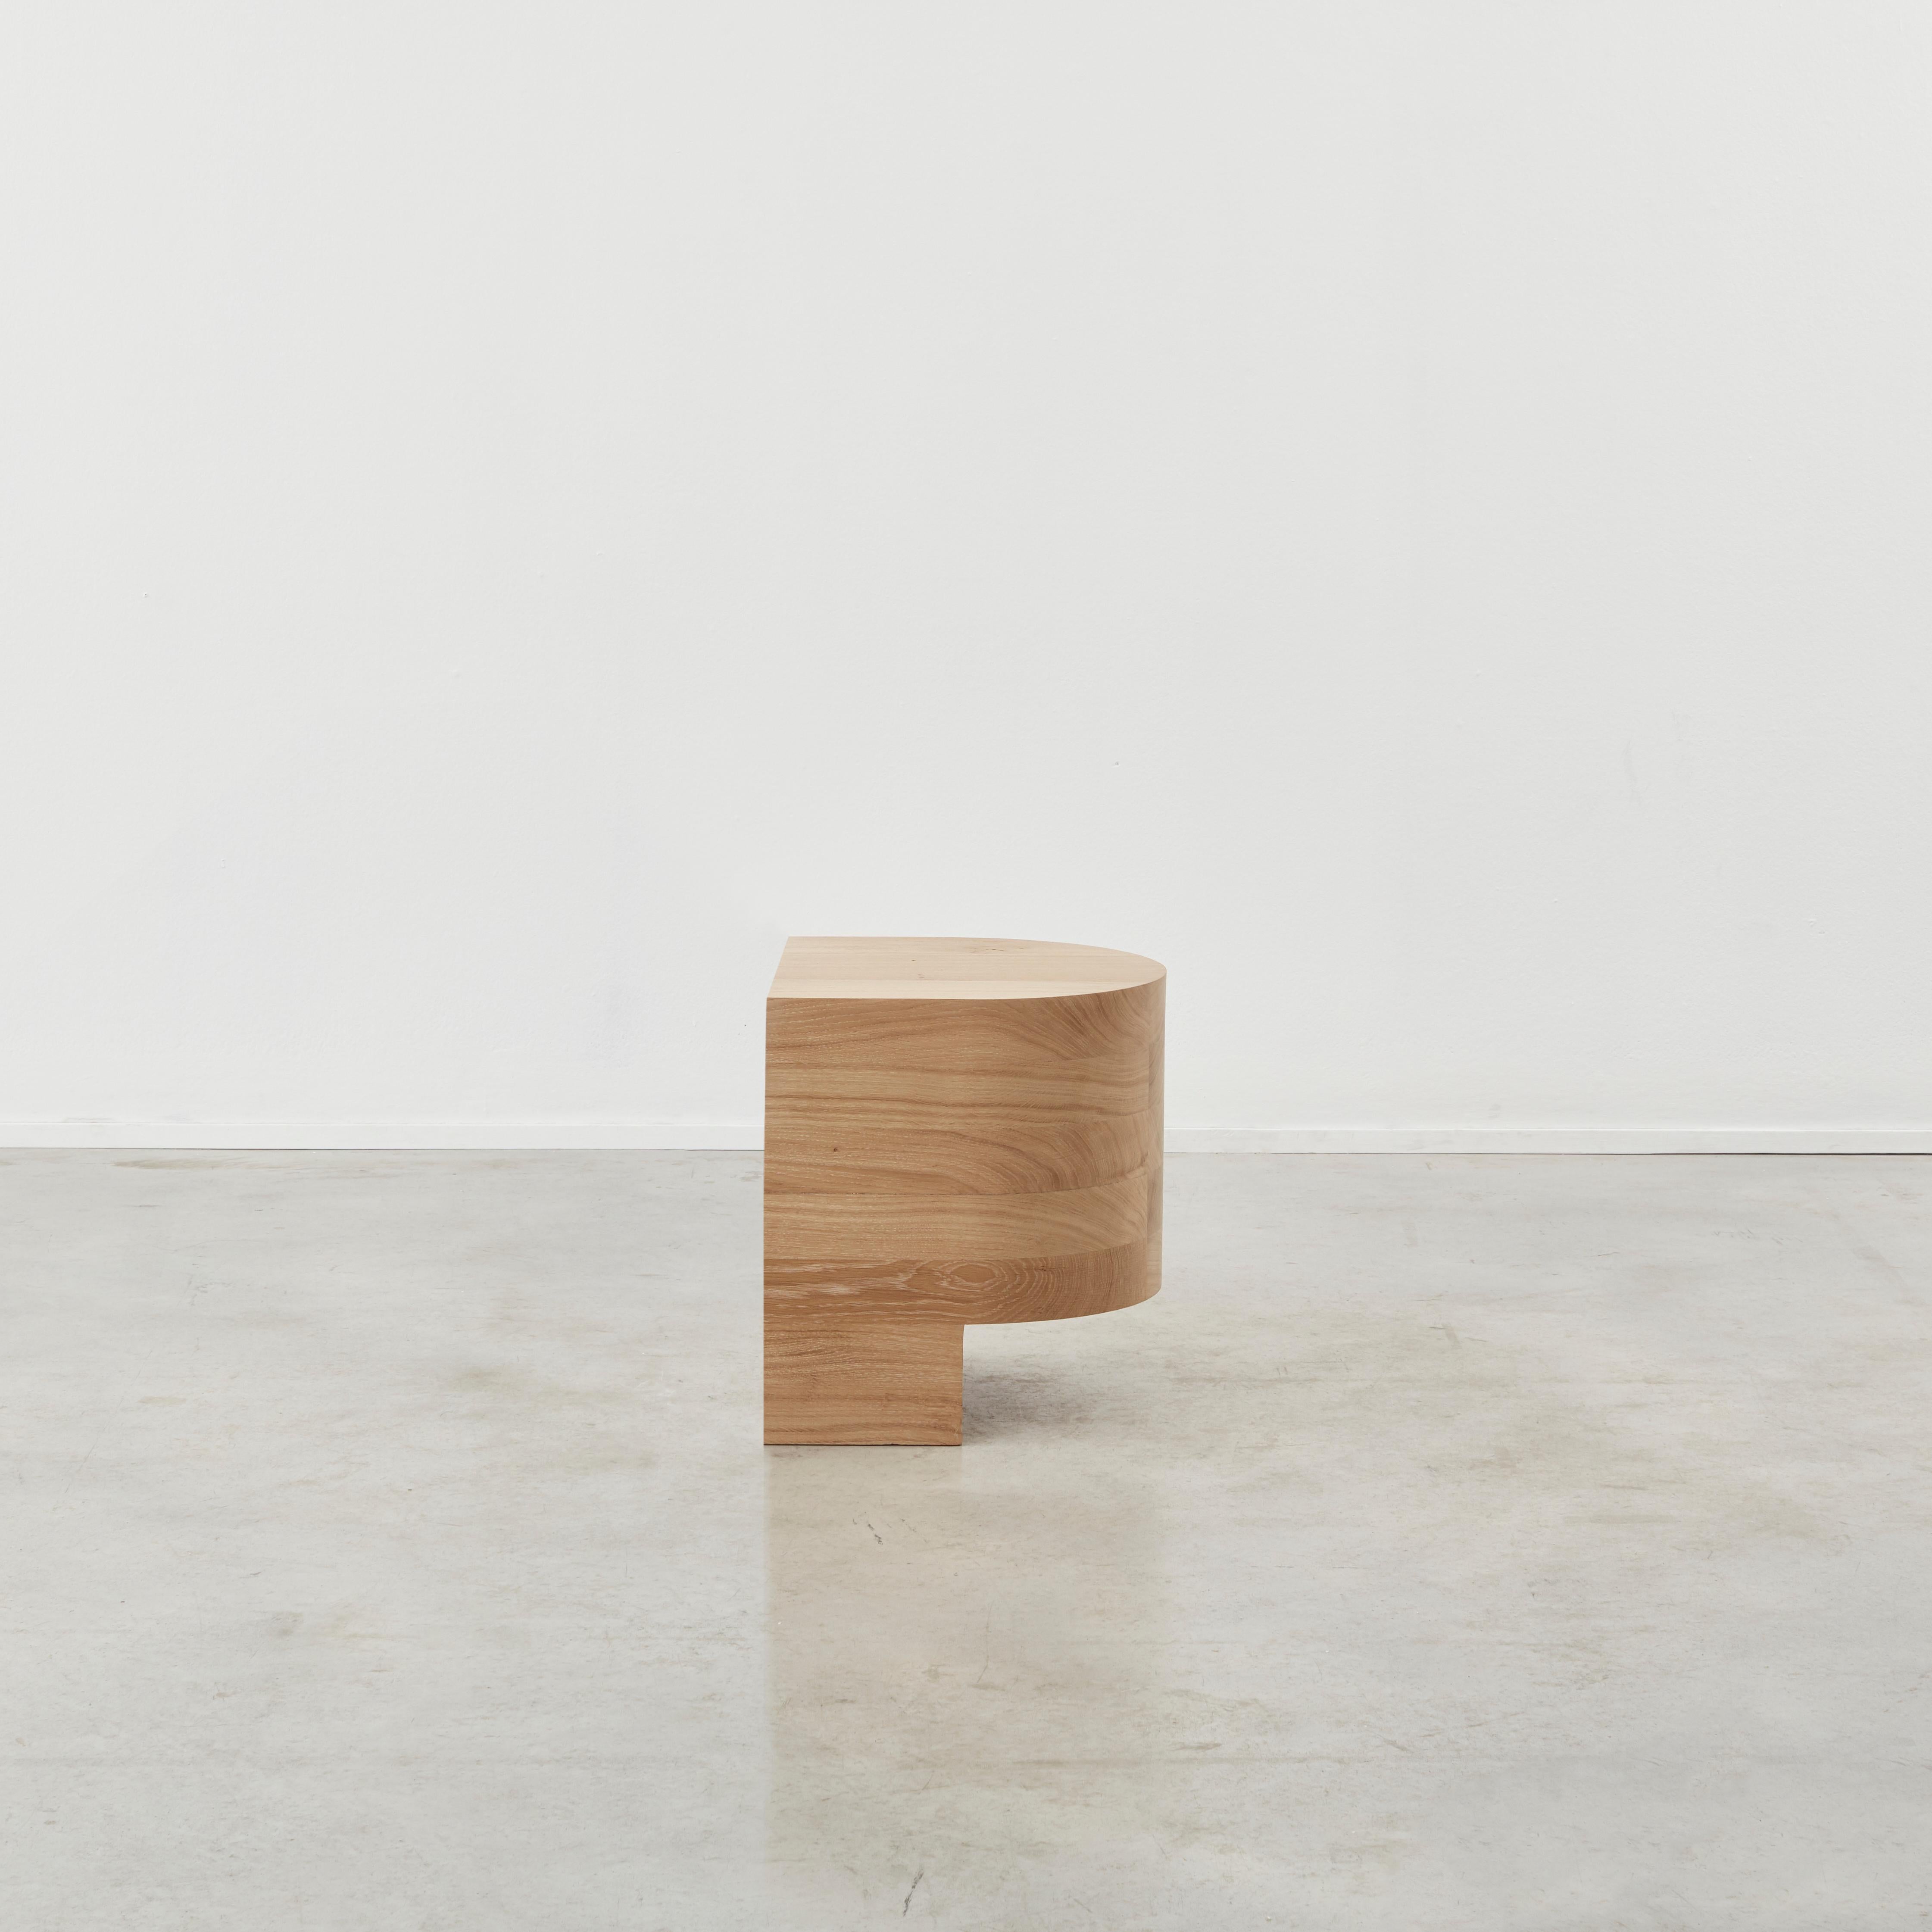 Edition of 8 + 1AP

‘Low Stool’ is a new work by architect, designer and maker Benni Allan exploring different ways of sitting. Part of his first full collection of furniture, Low Collection, exclusive to Béton Brut. And was inspired by recent